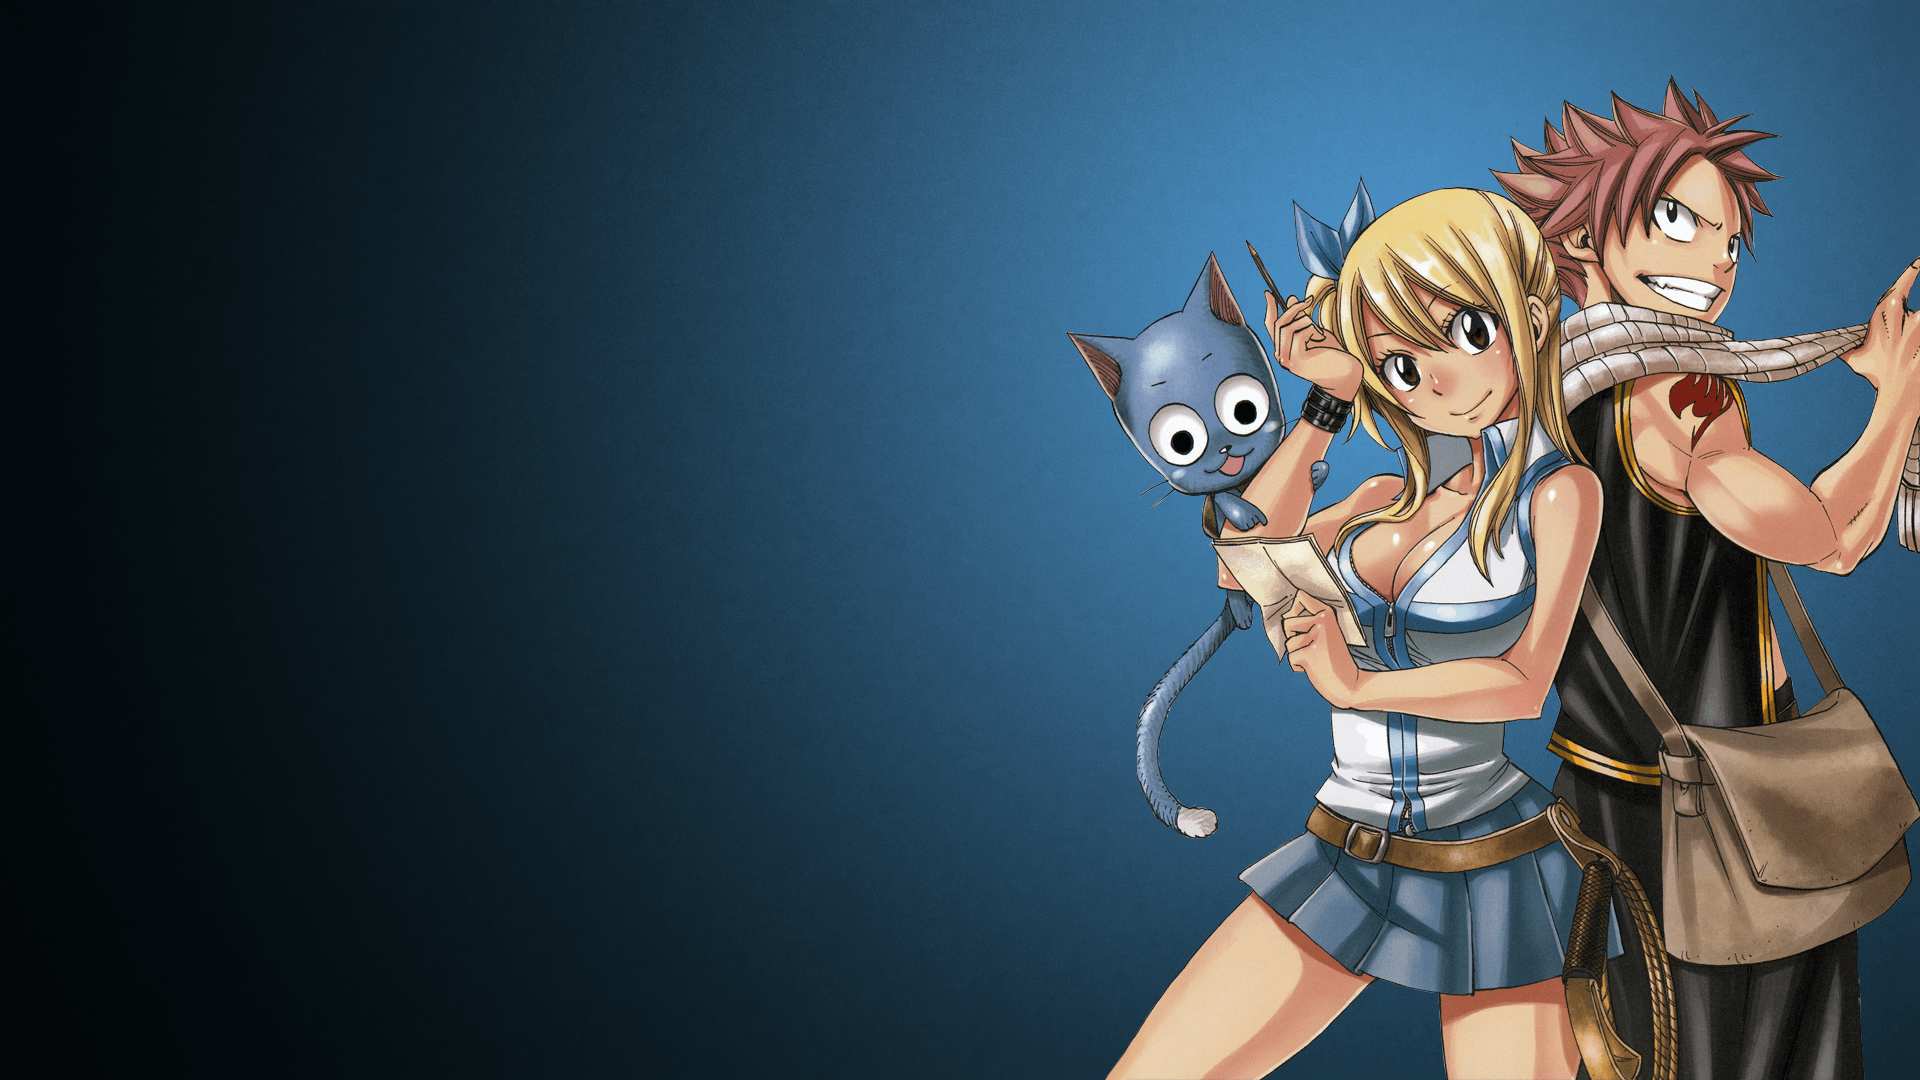 Fairy Tail Lucy Wallpaper Free Fairy Tail Lucy Background